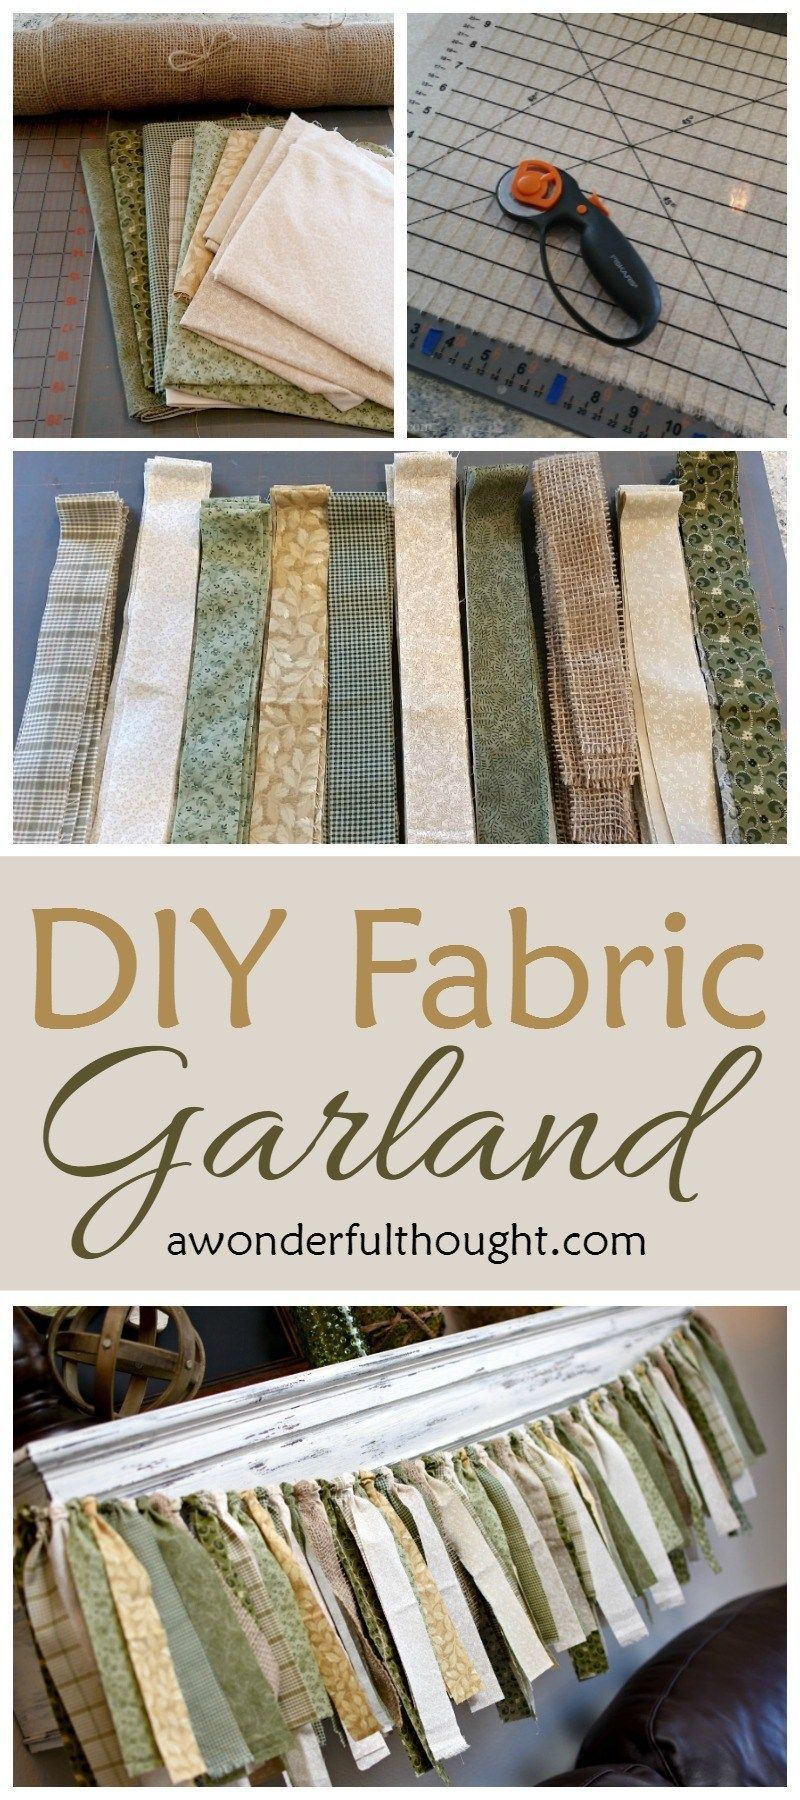 DIY Fabric Garland - A Wonderful Thought -   16 diy projects Baby thoughts ideas